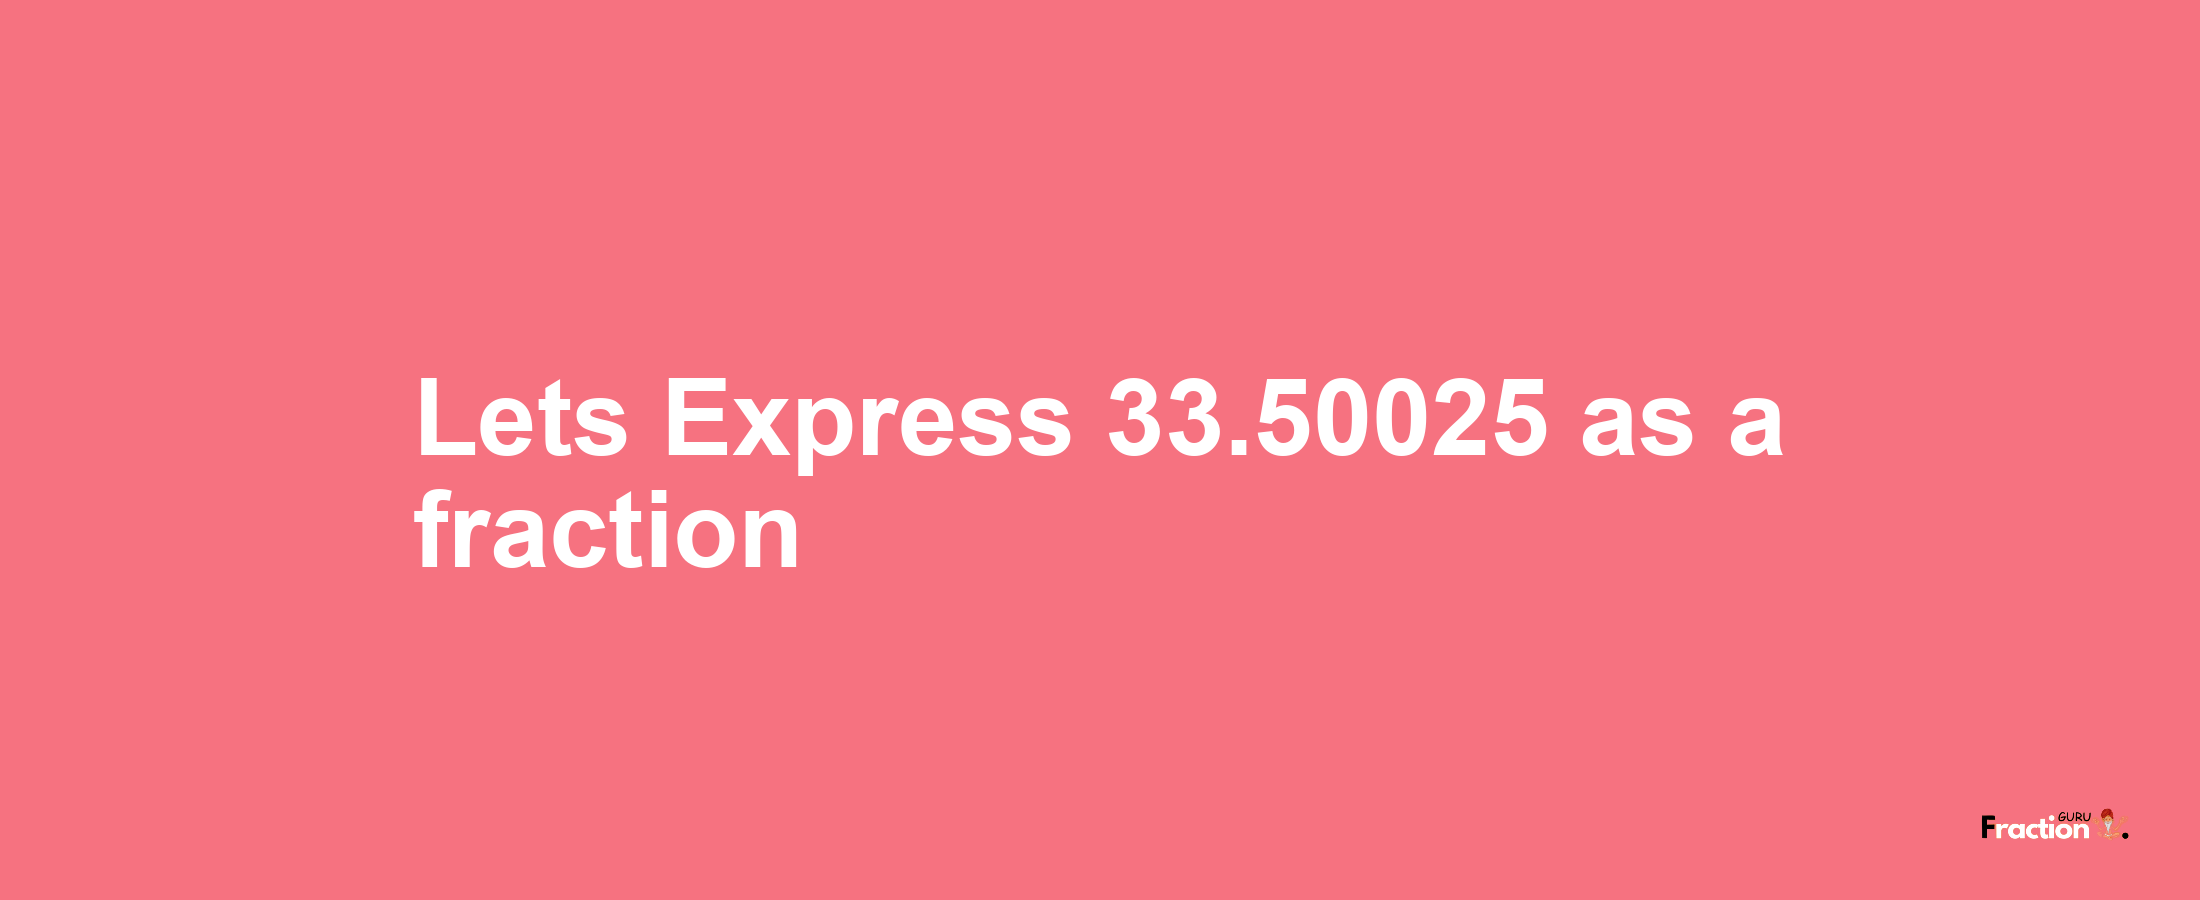 Lets Express 33.50025 as afraction